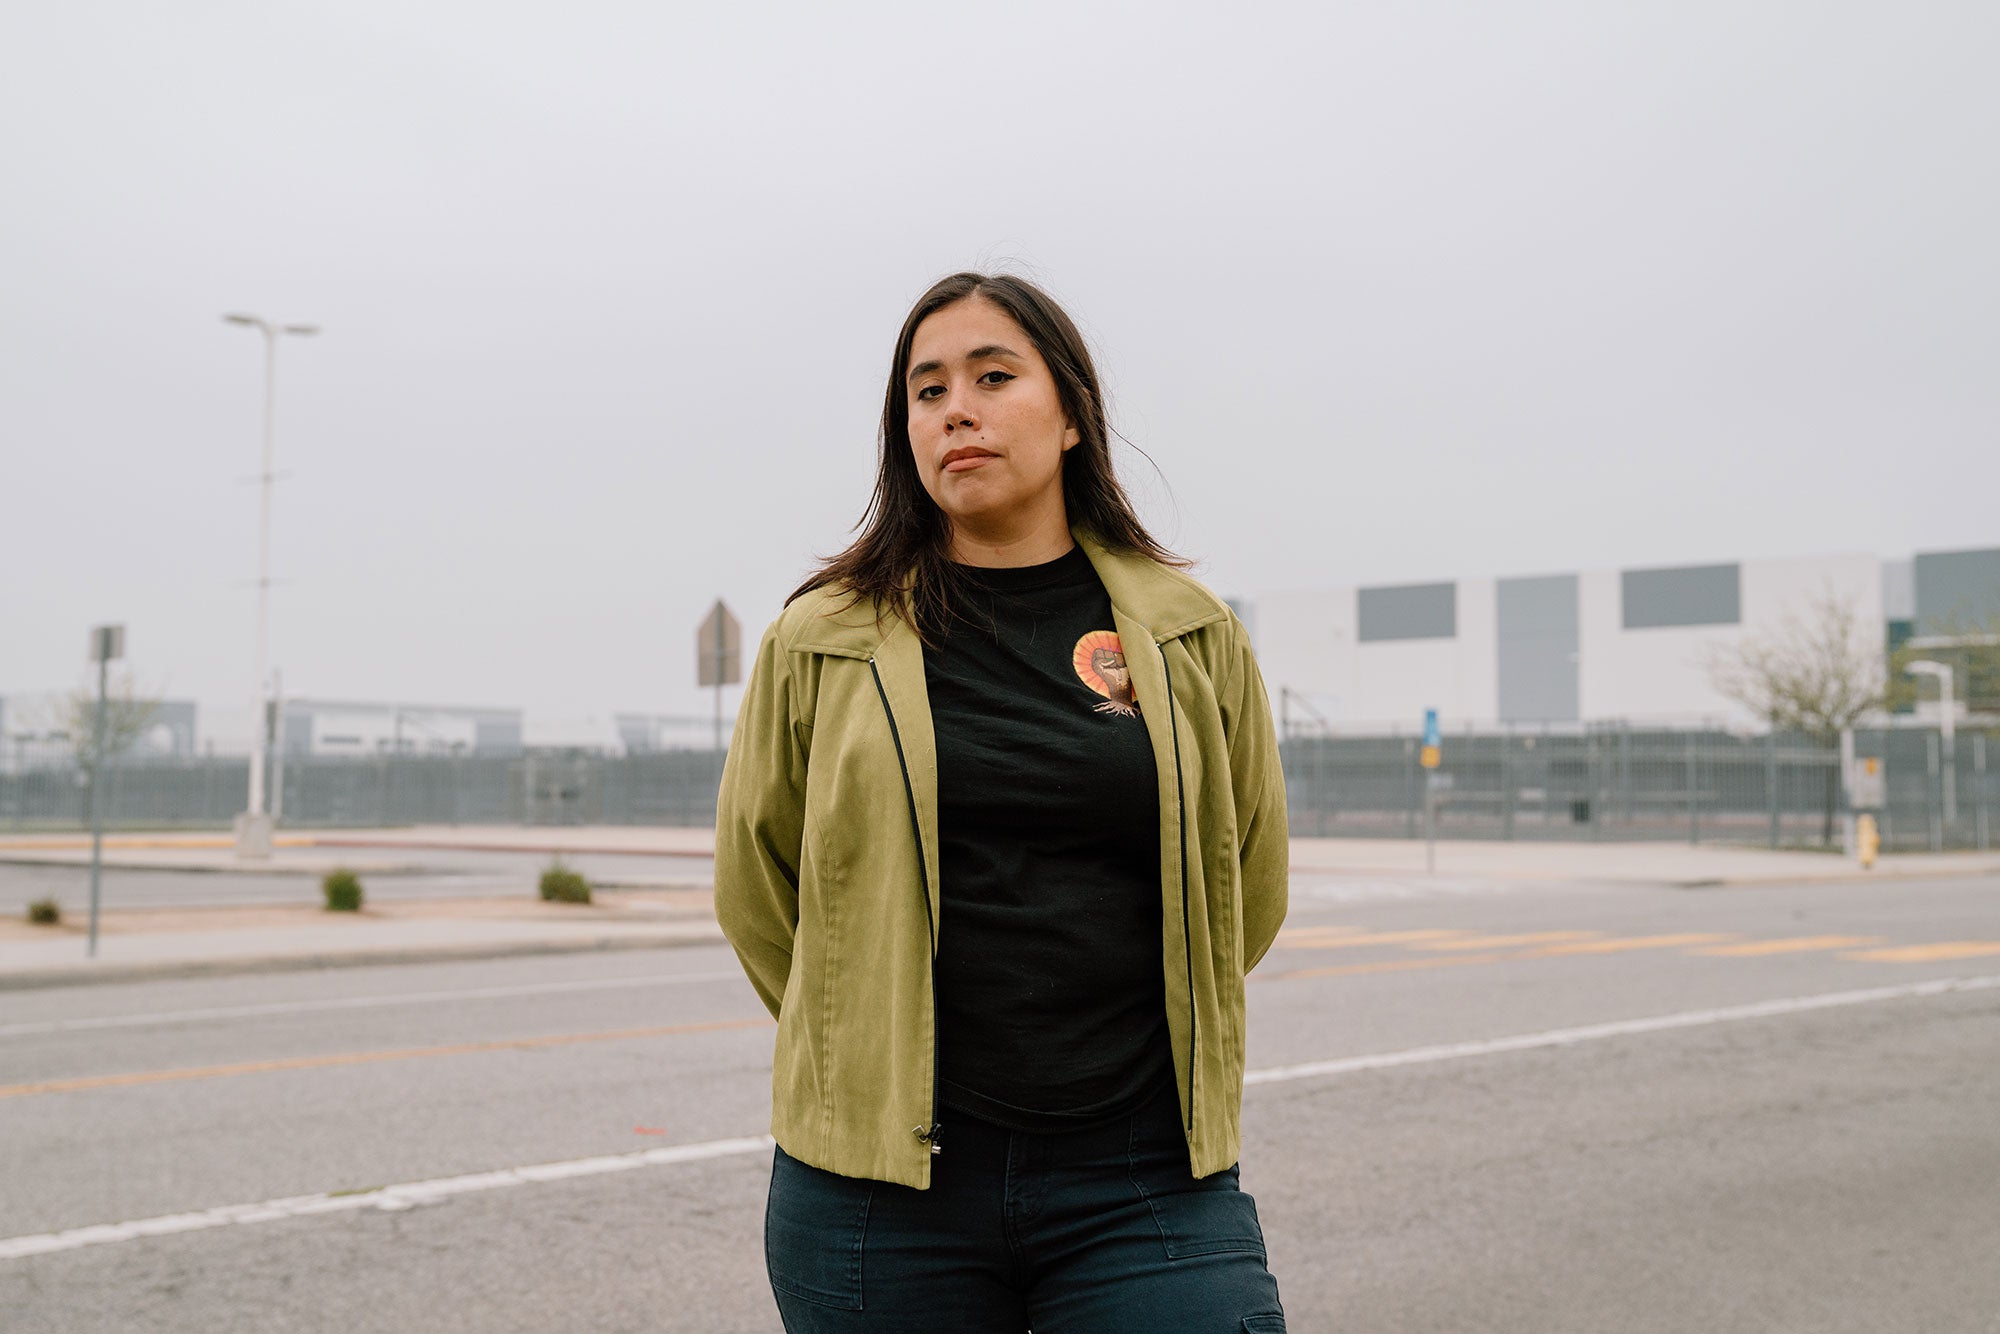 Andrea Vidaurre, co-founder of the People's Collective for Environmental Justice in Grand Terrace, California.